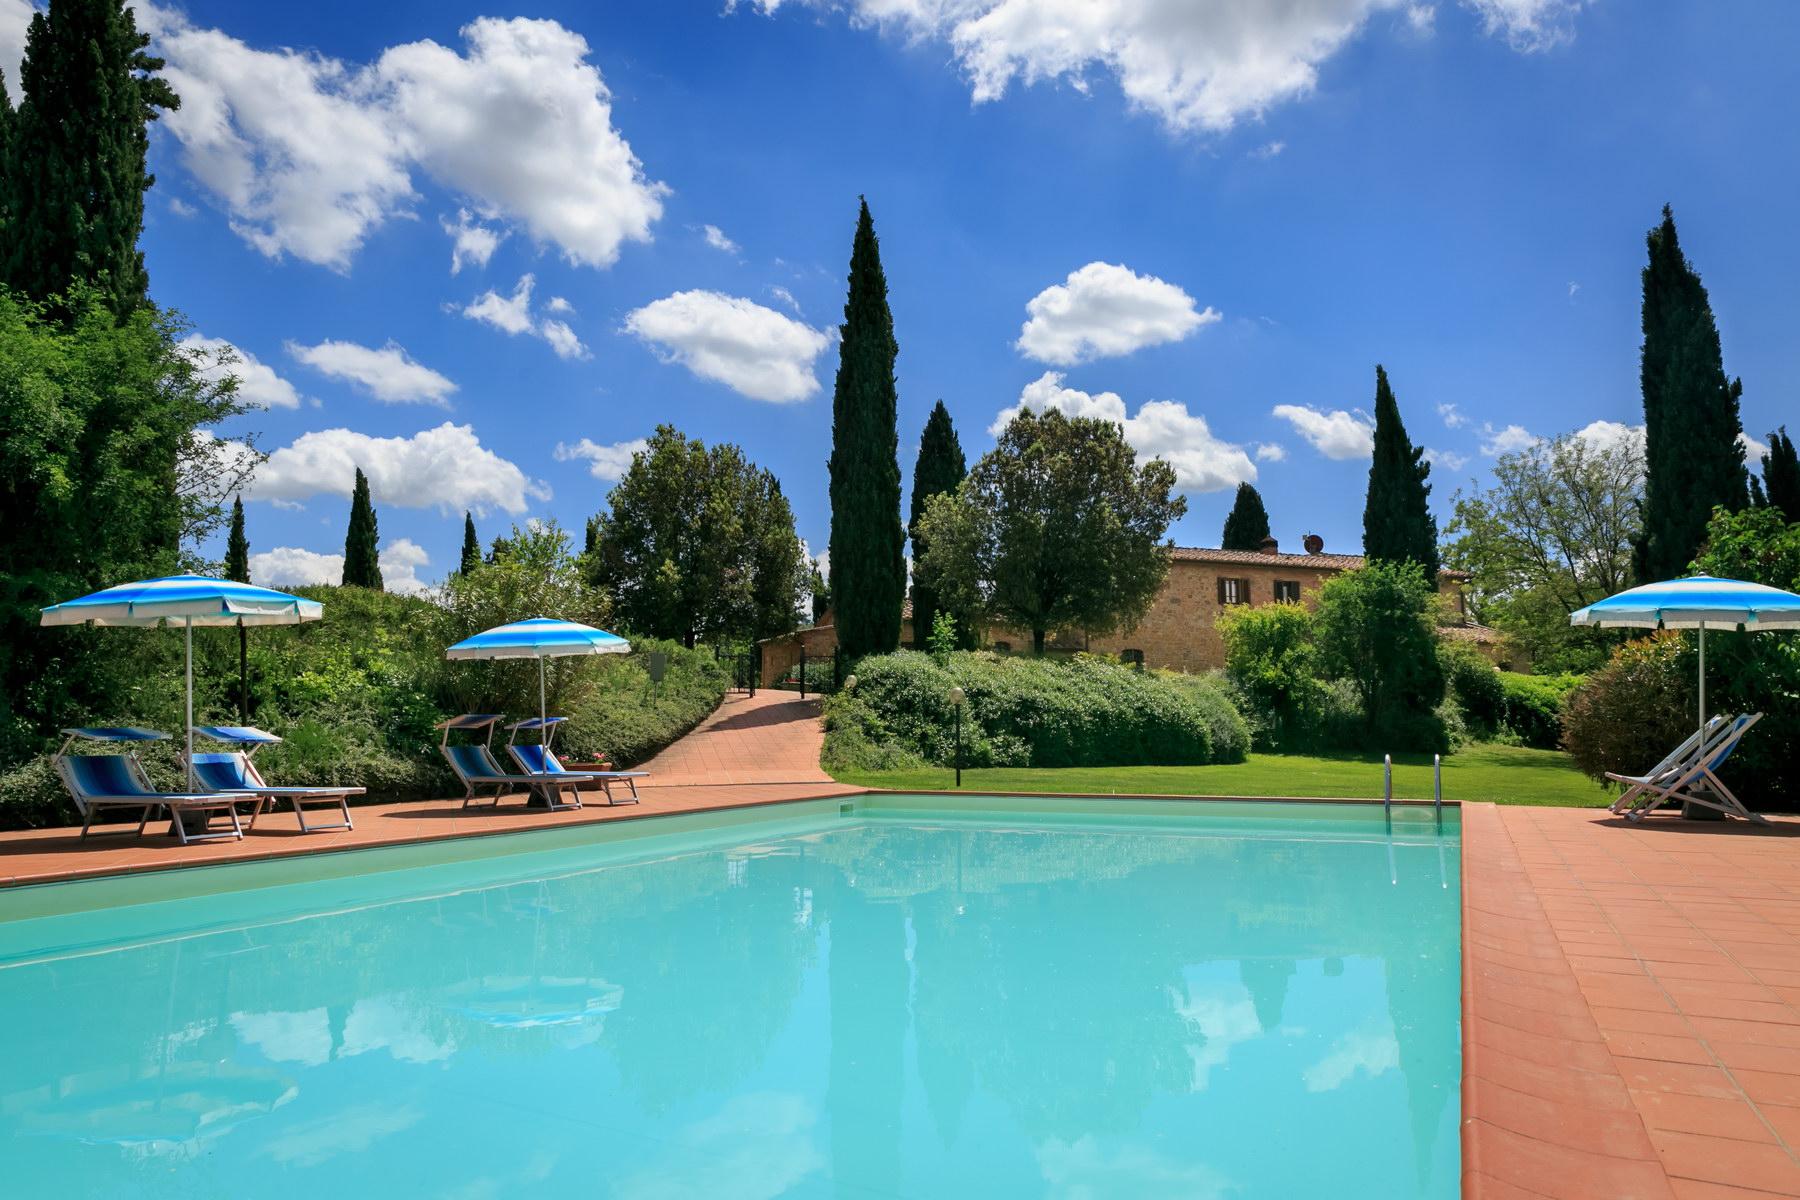 Wonderful countryhouse in the tuscan countryside - 2